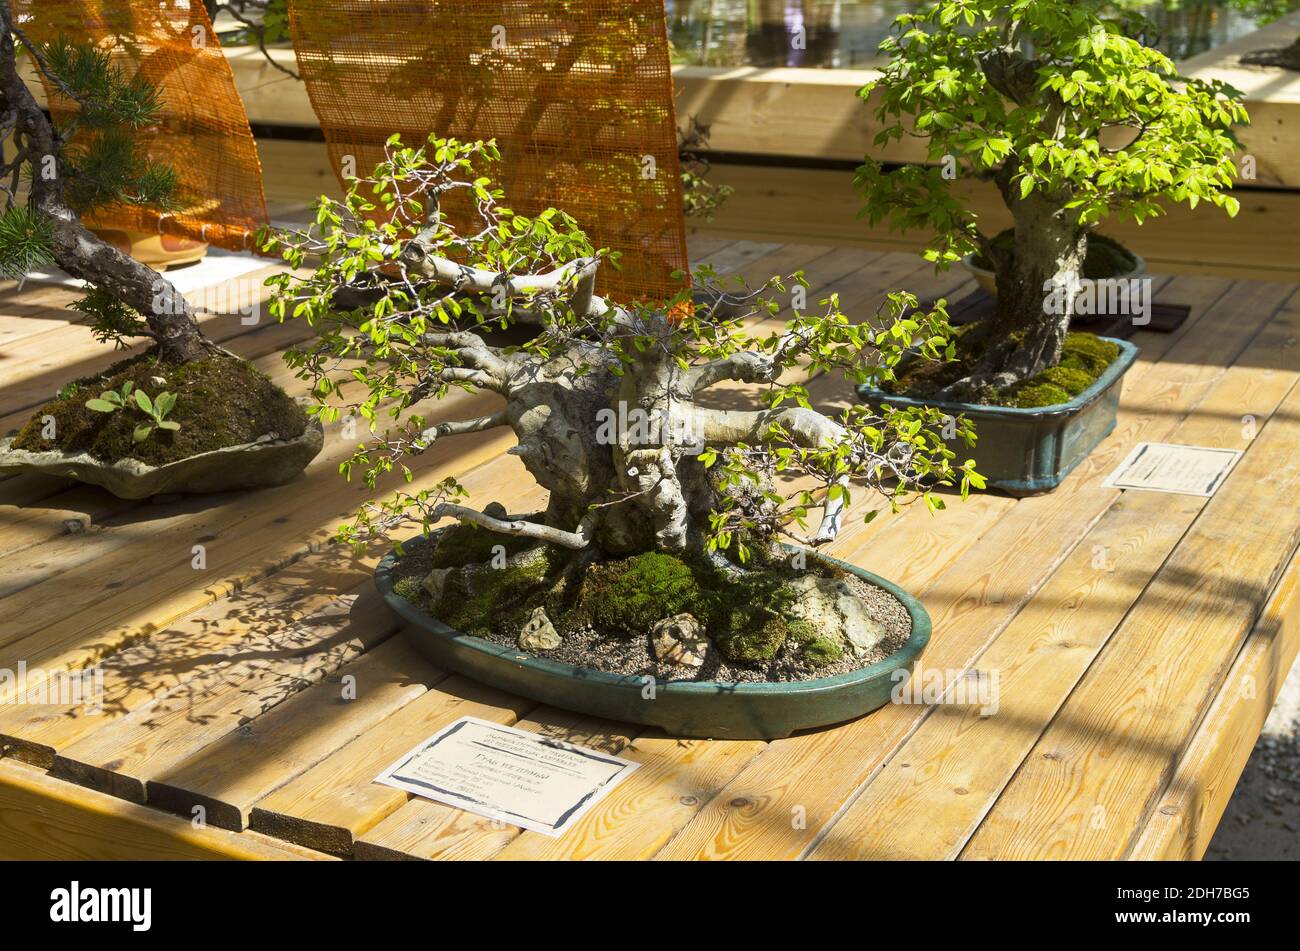 Oriental hornbeam - Bonsai in the style of Straight and free. Stock Photo